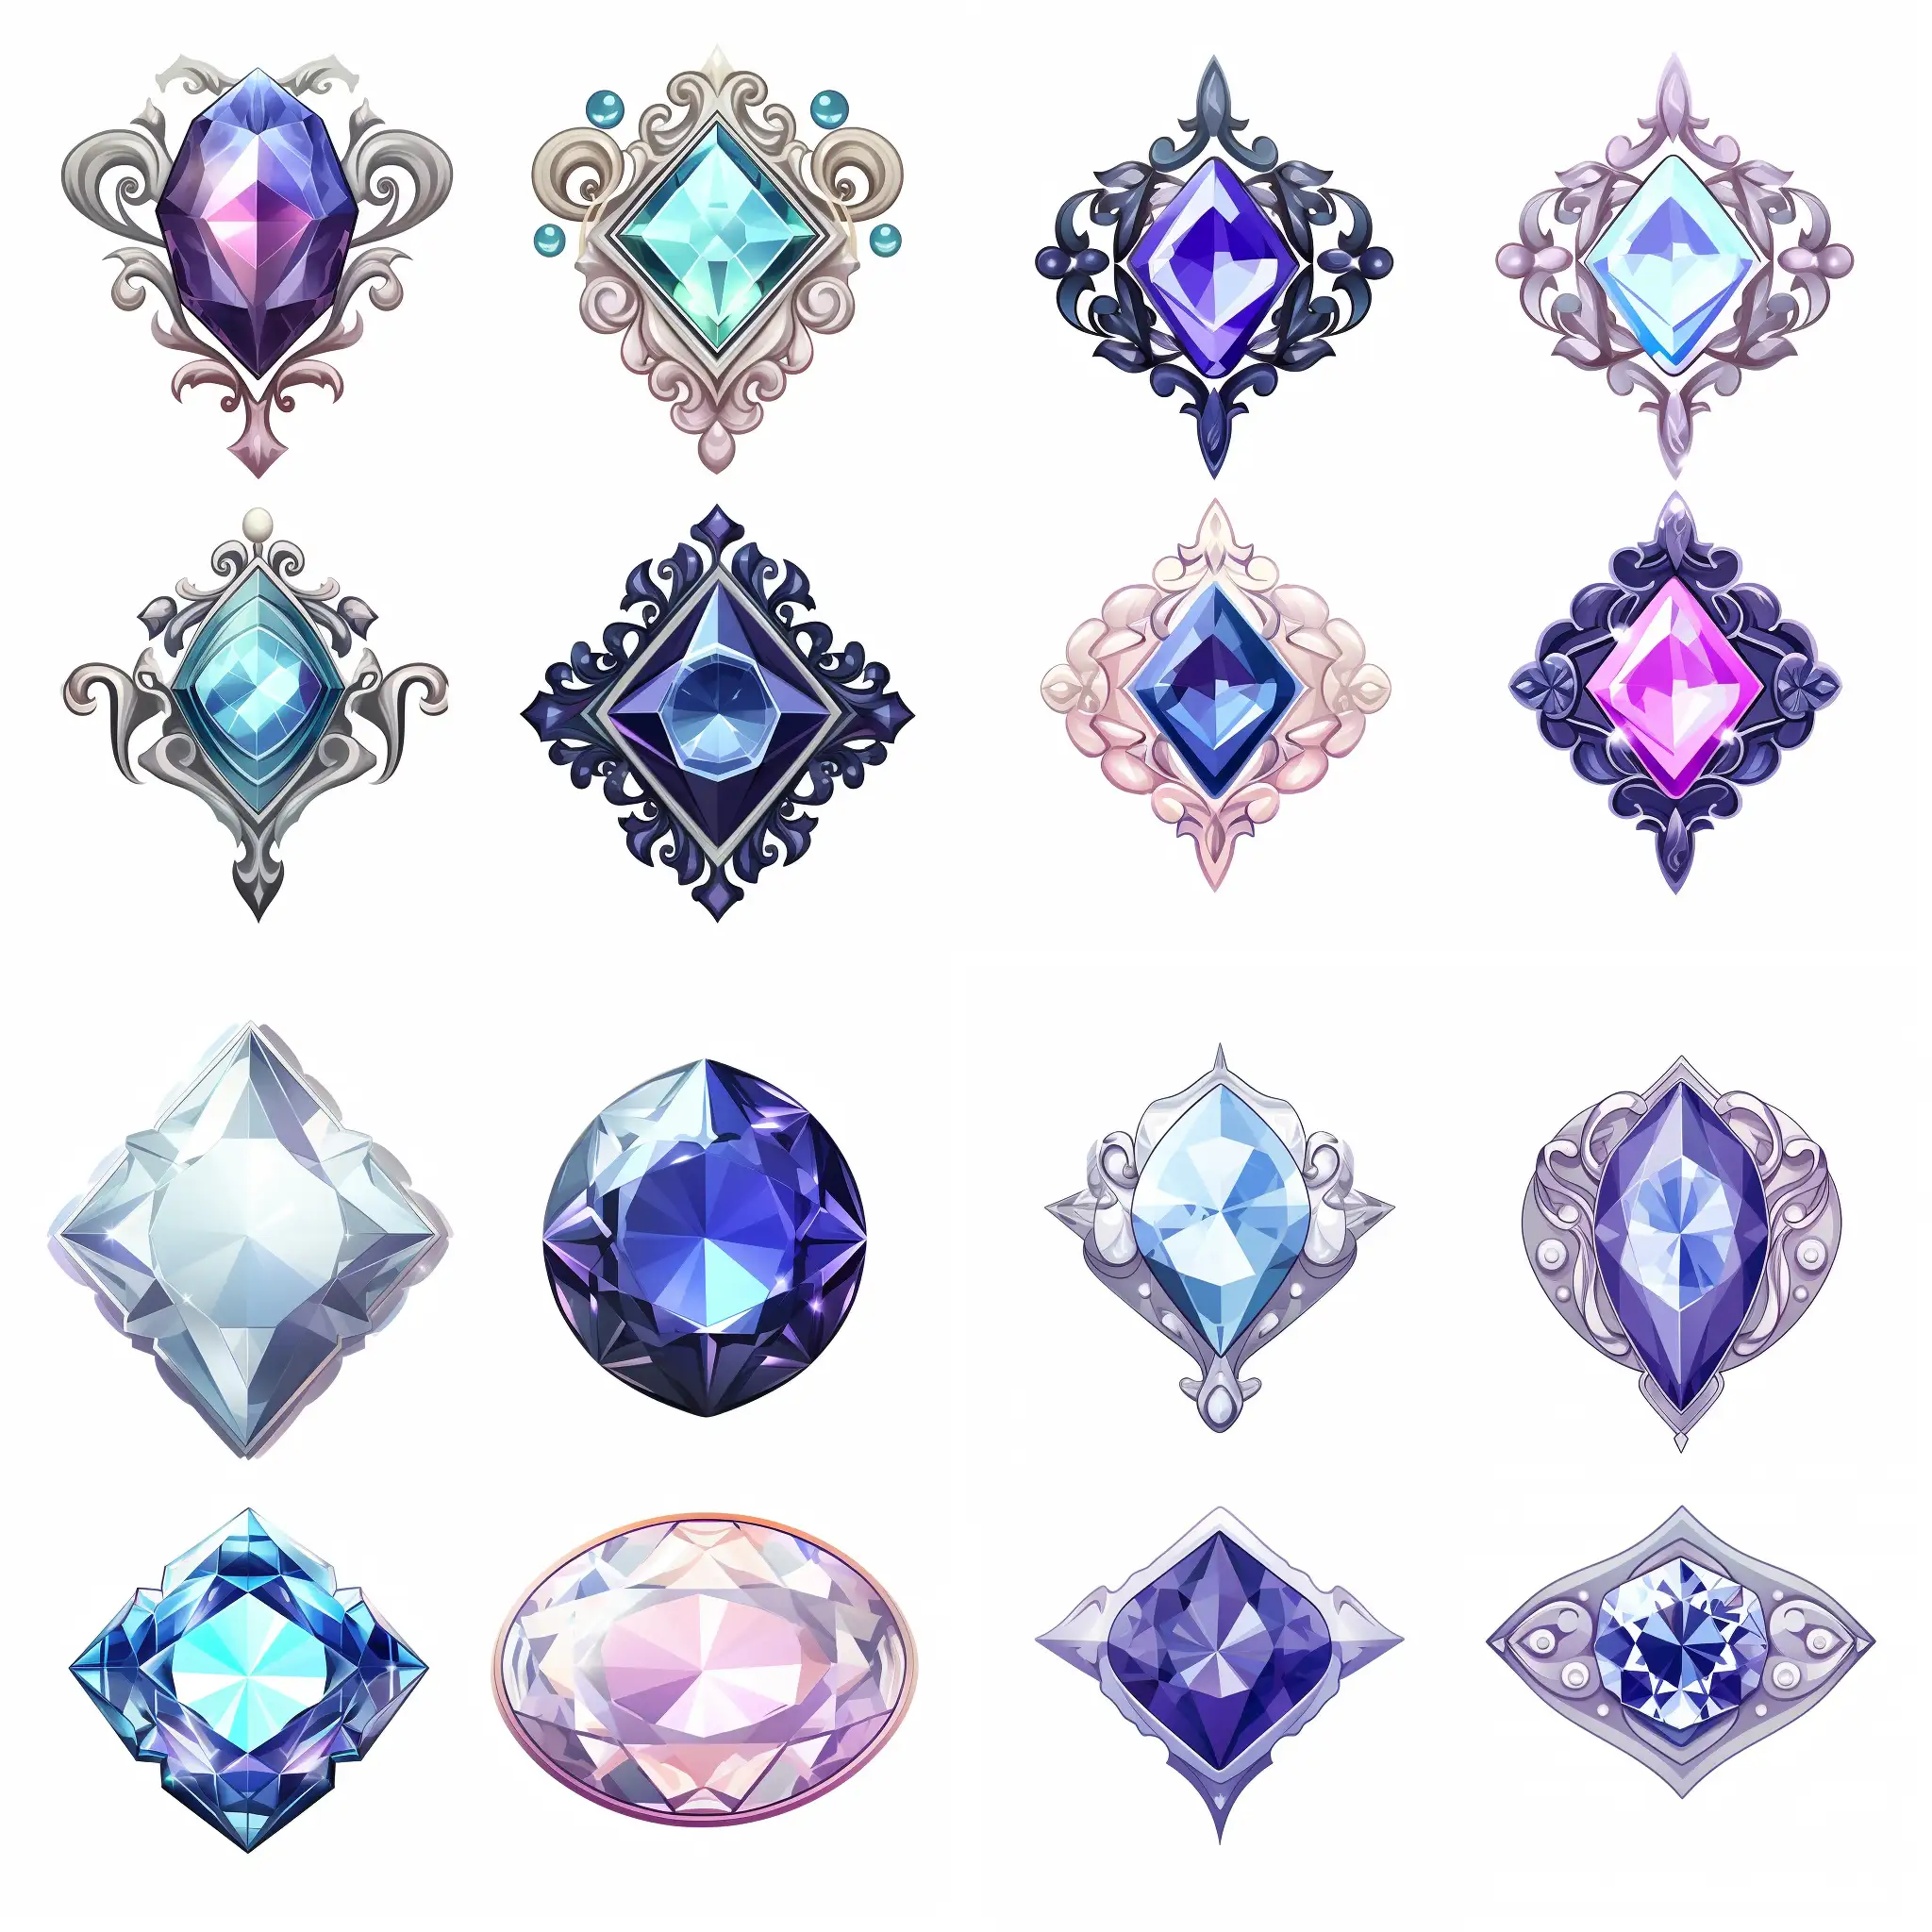 Four versions of the diamond, with a beautiful stylish ornament, cartoon style, Art Deco style, on a white background